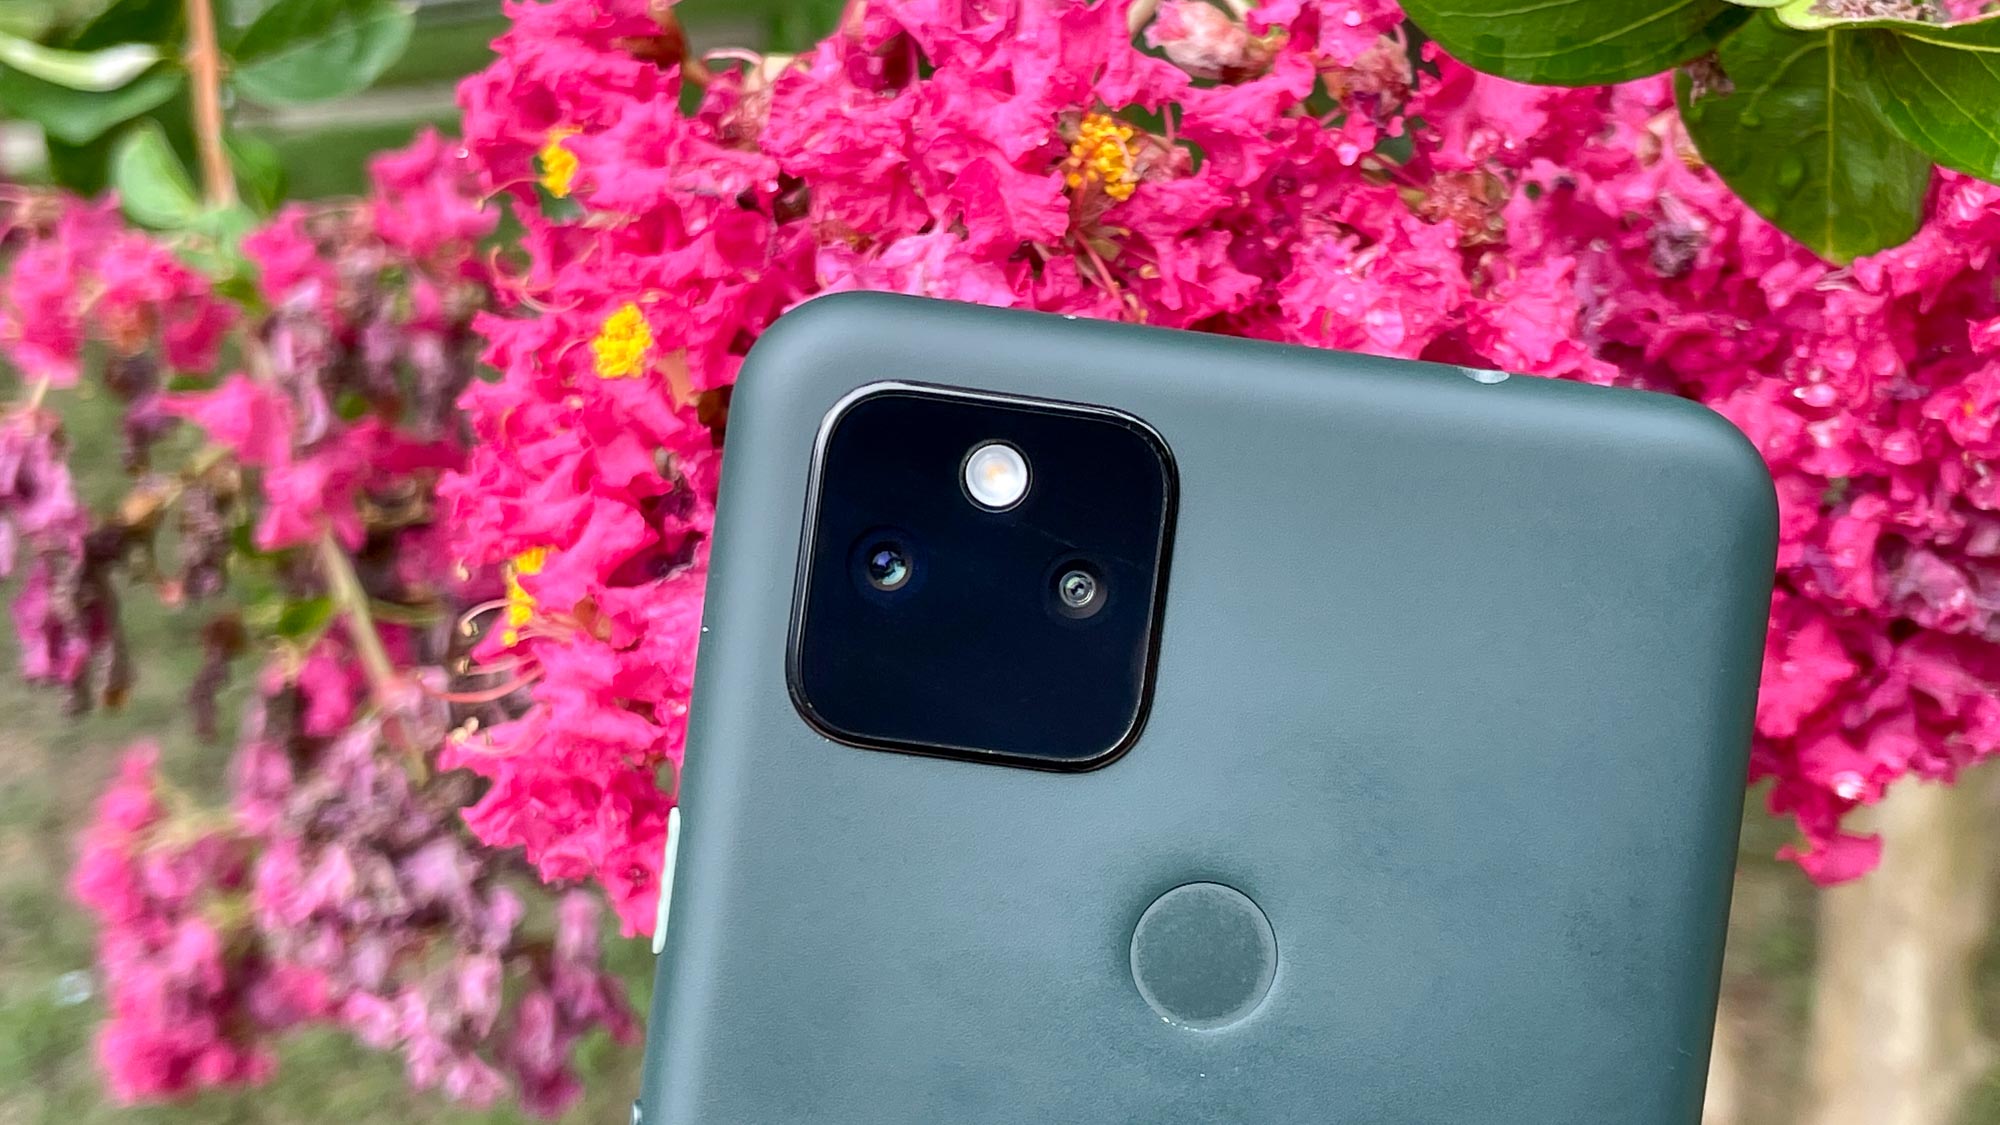 The back of the Google Pixel 5a showing the camera module against a background of pink flowers